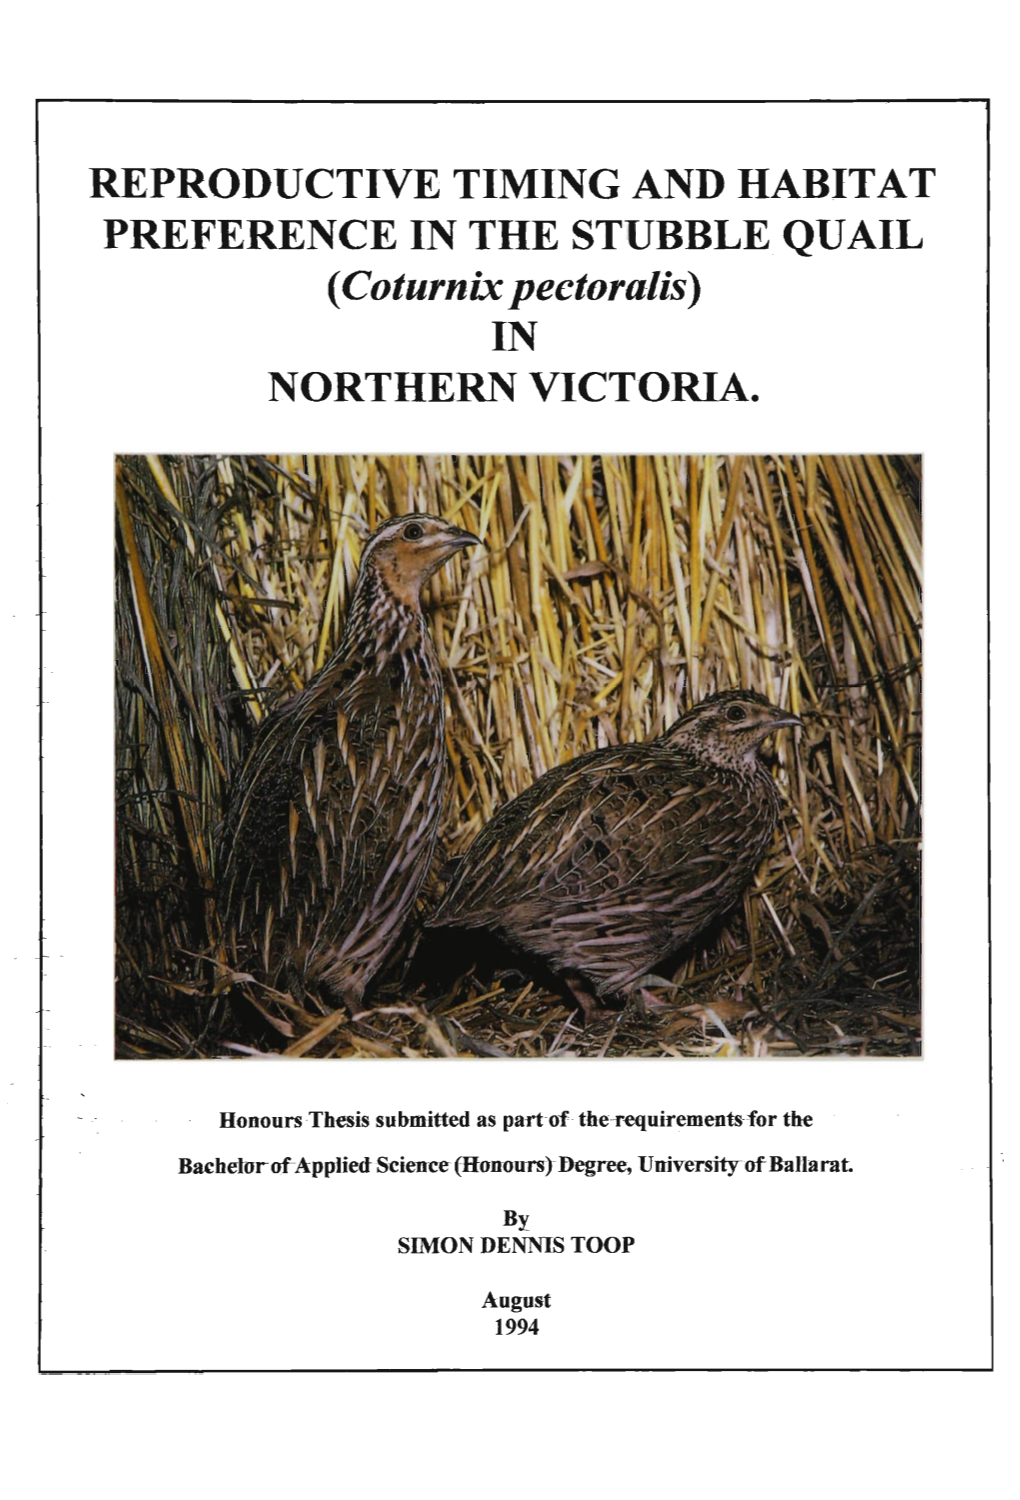 REPRODUCTIVE TIMING and HABITAT PREFERENCE in the STUBBLE QUAIL (Coturnix Pectoralis) in NORTHERN VICTORIA